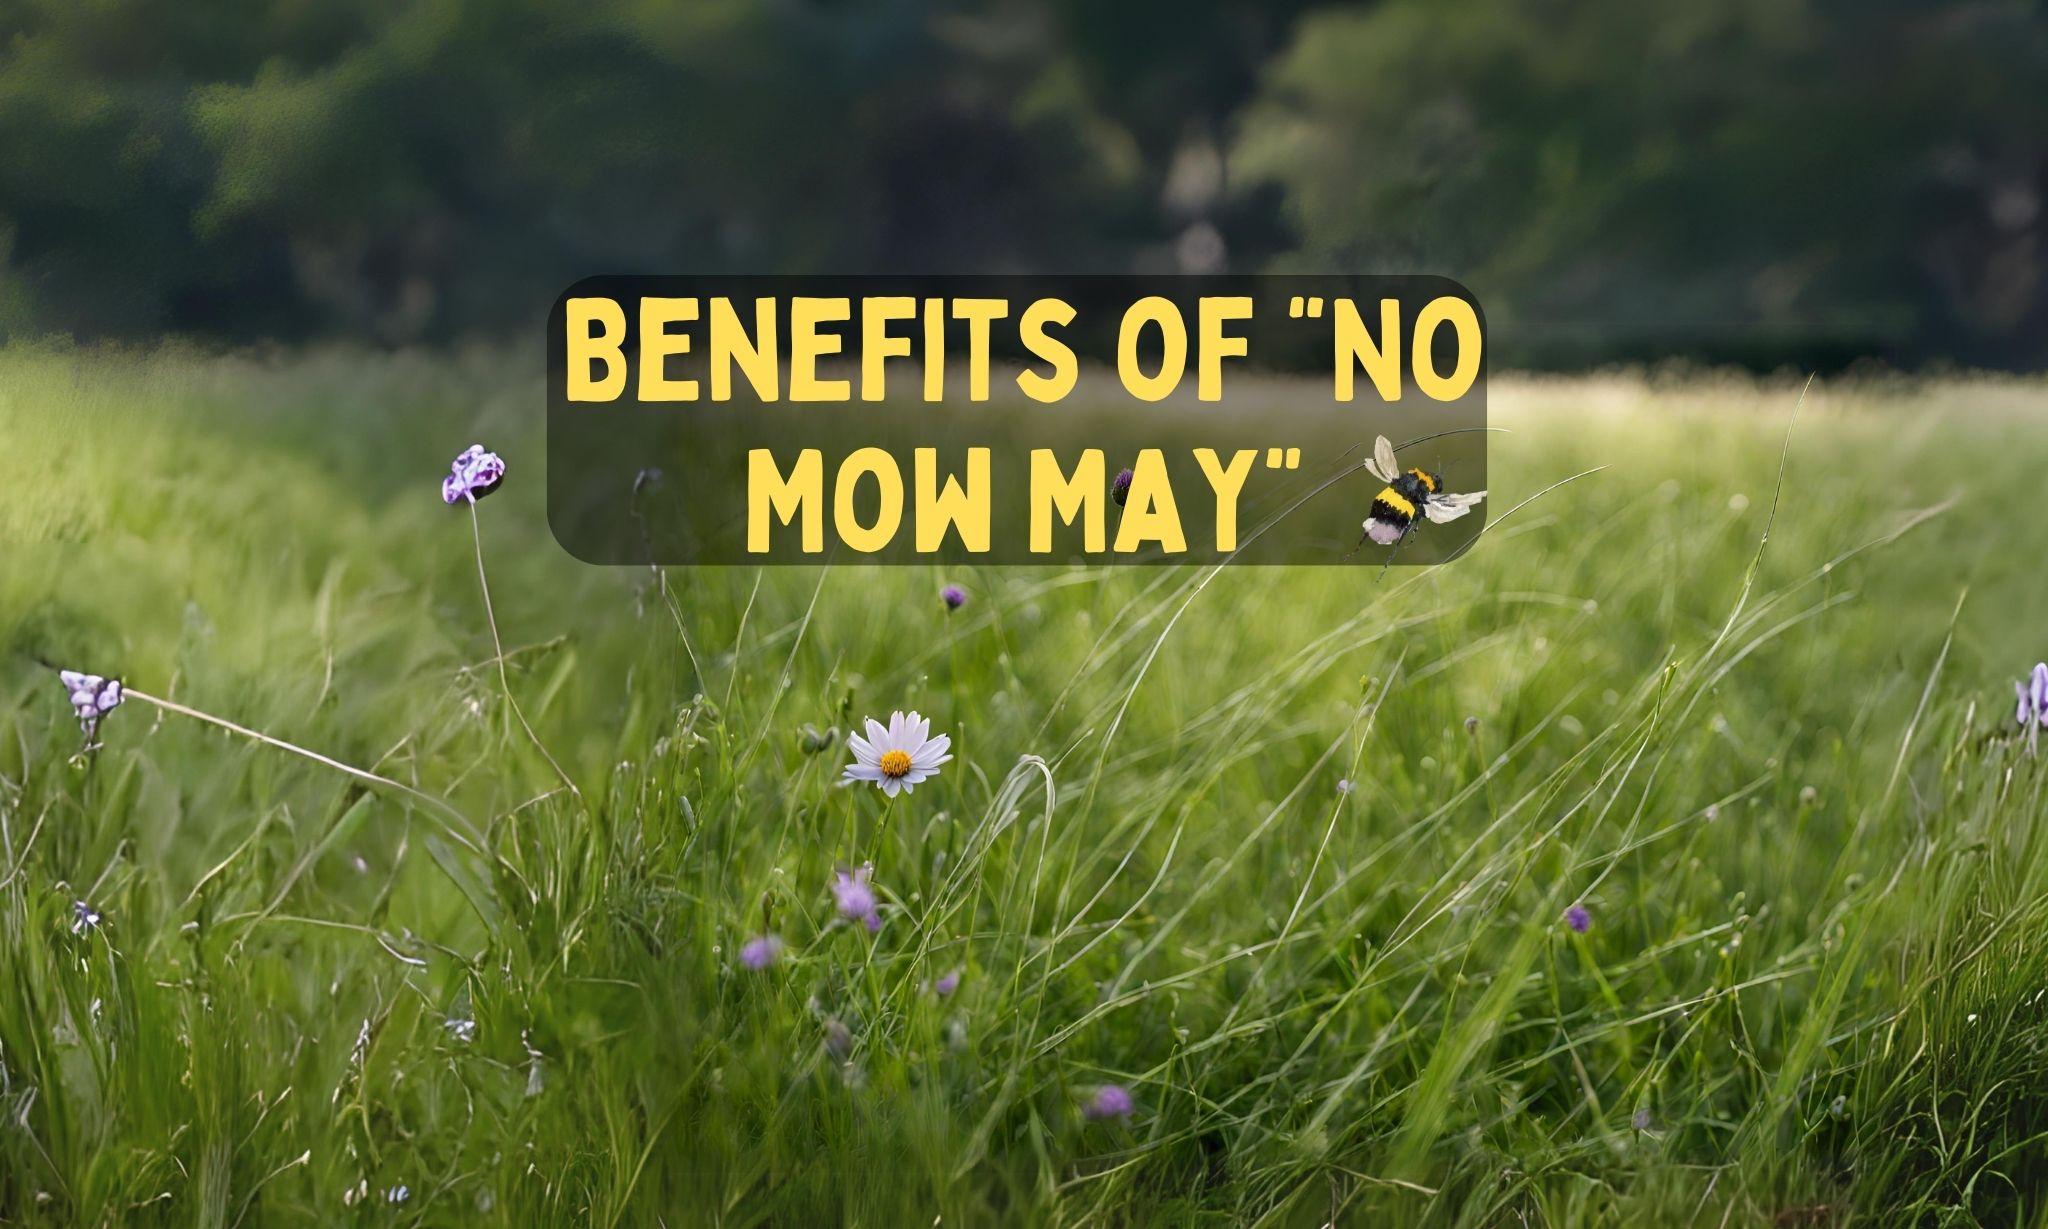 The benefits of No Mow May